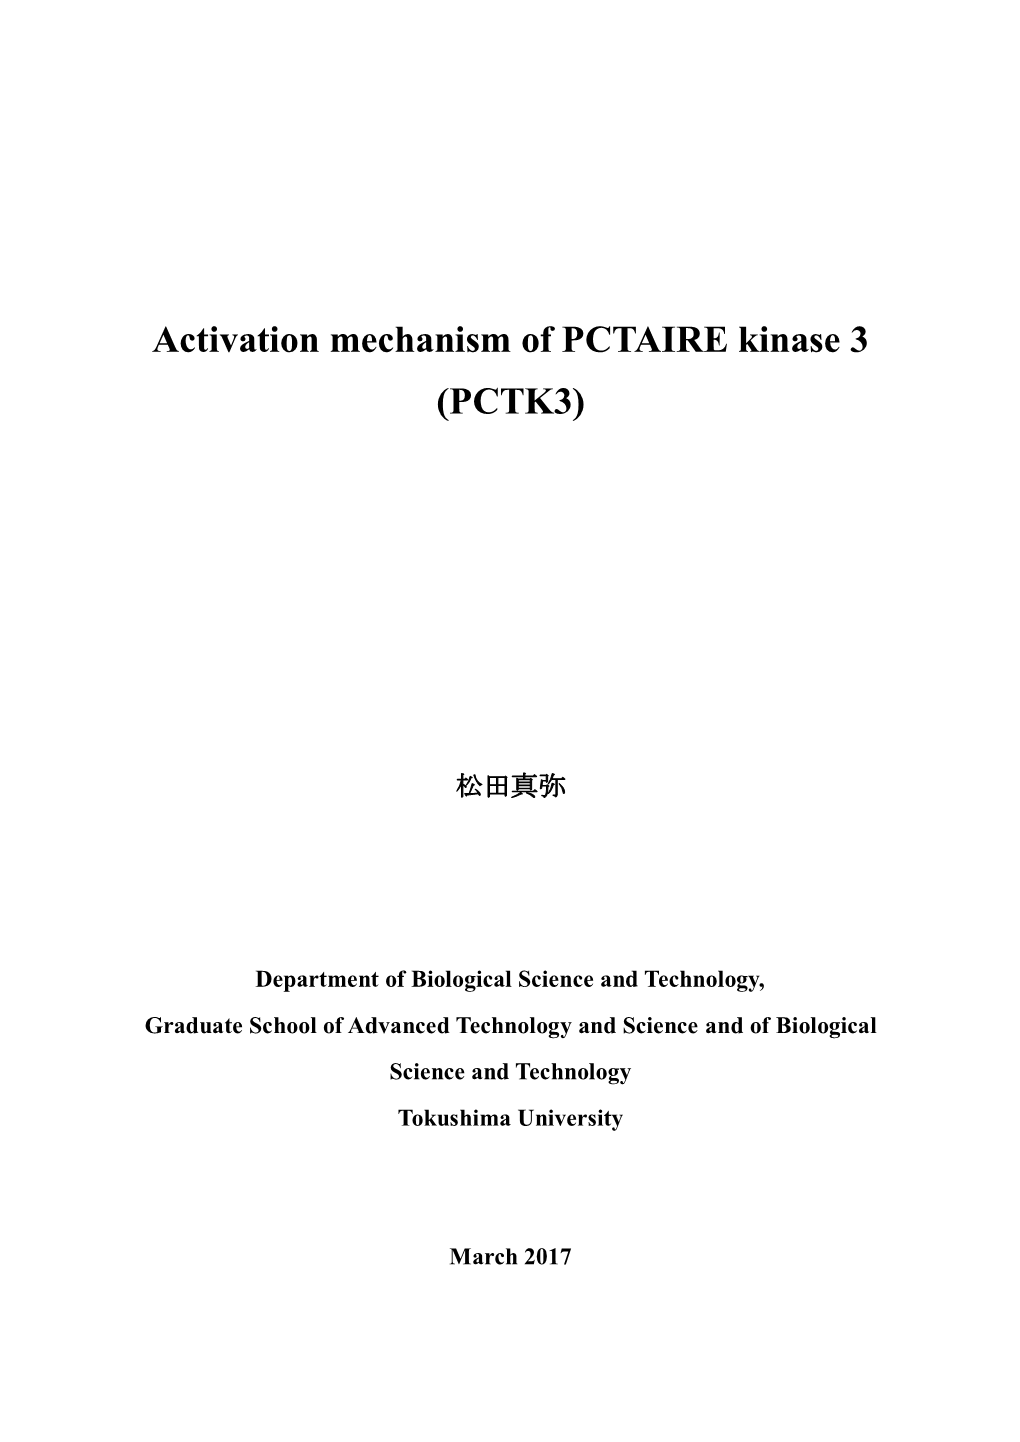 Activation Mechanism of PCTAIRE Kinase 3 (PCTK3)